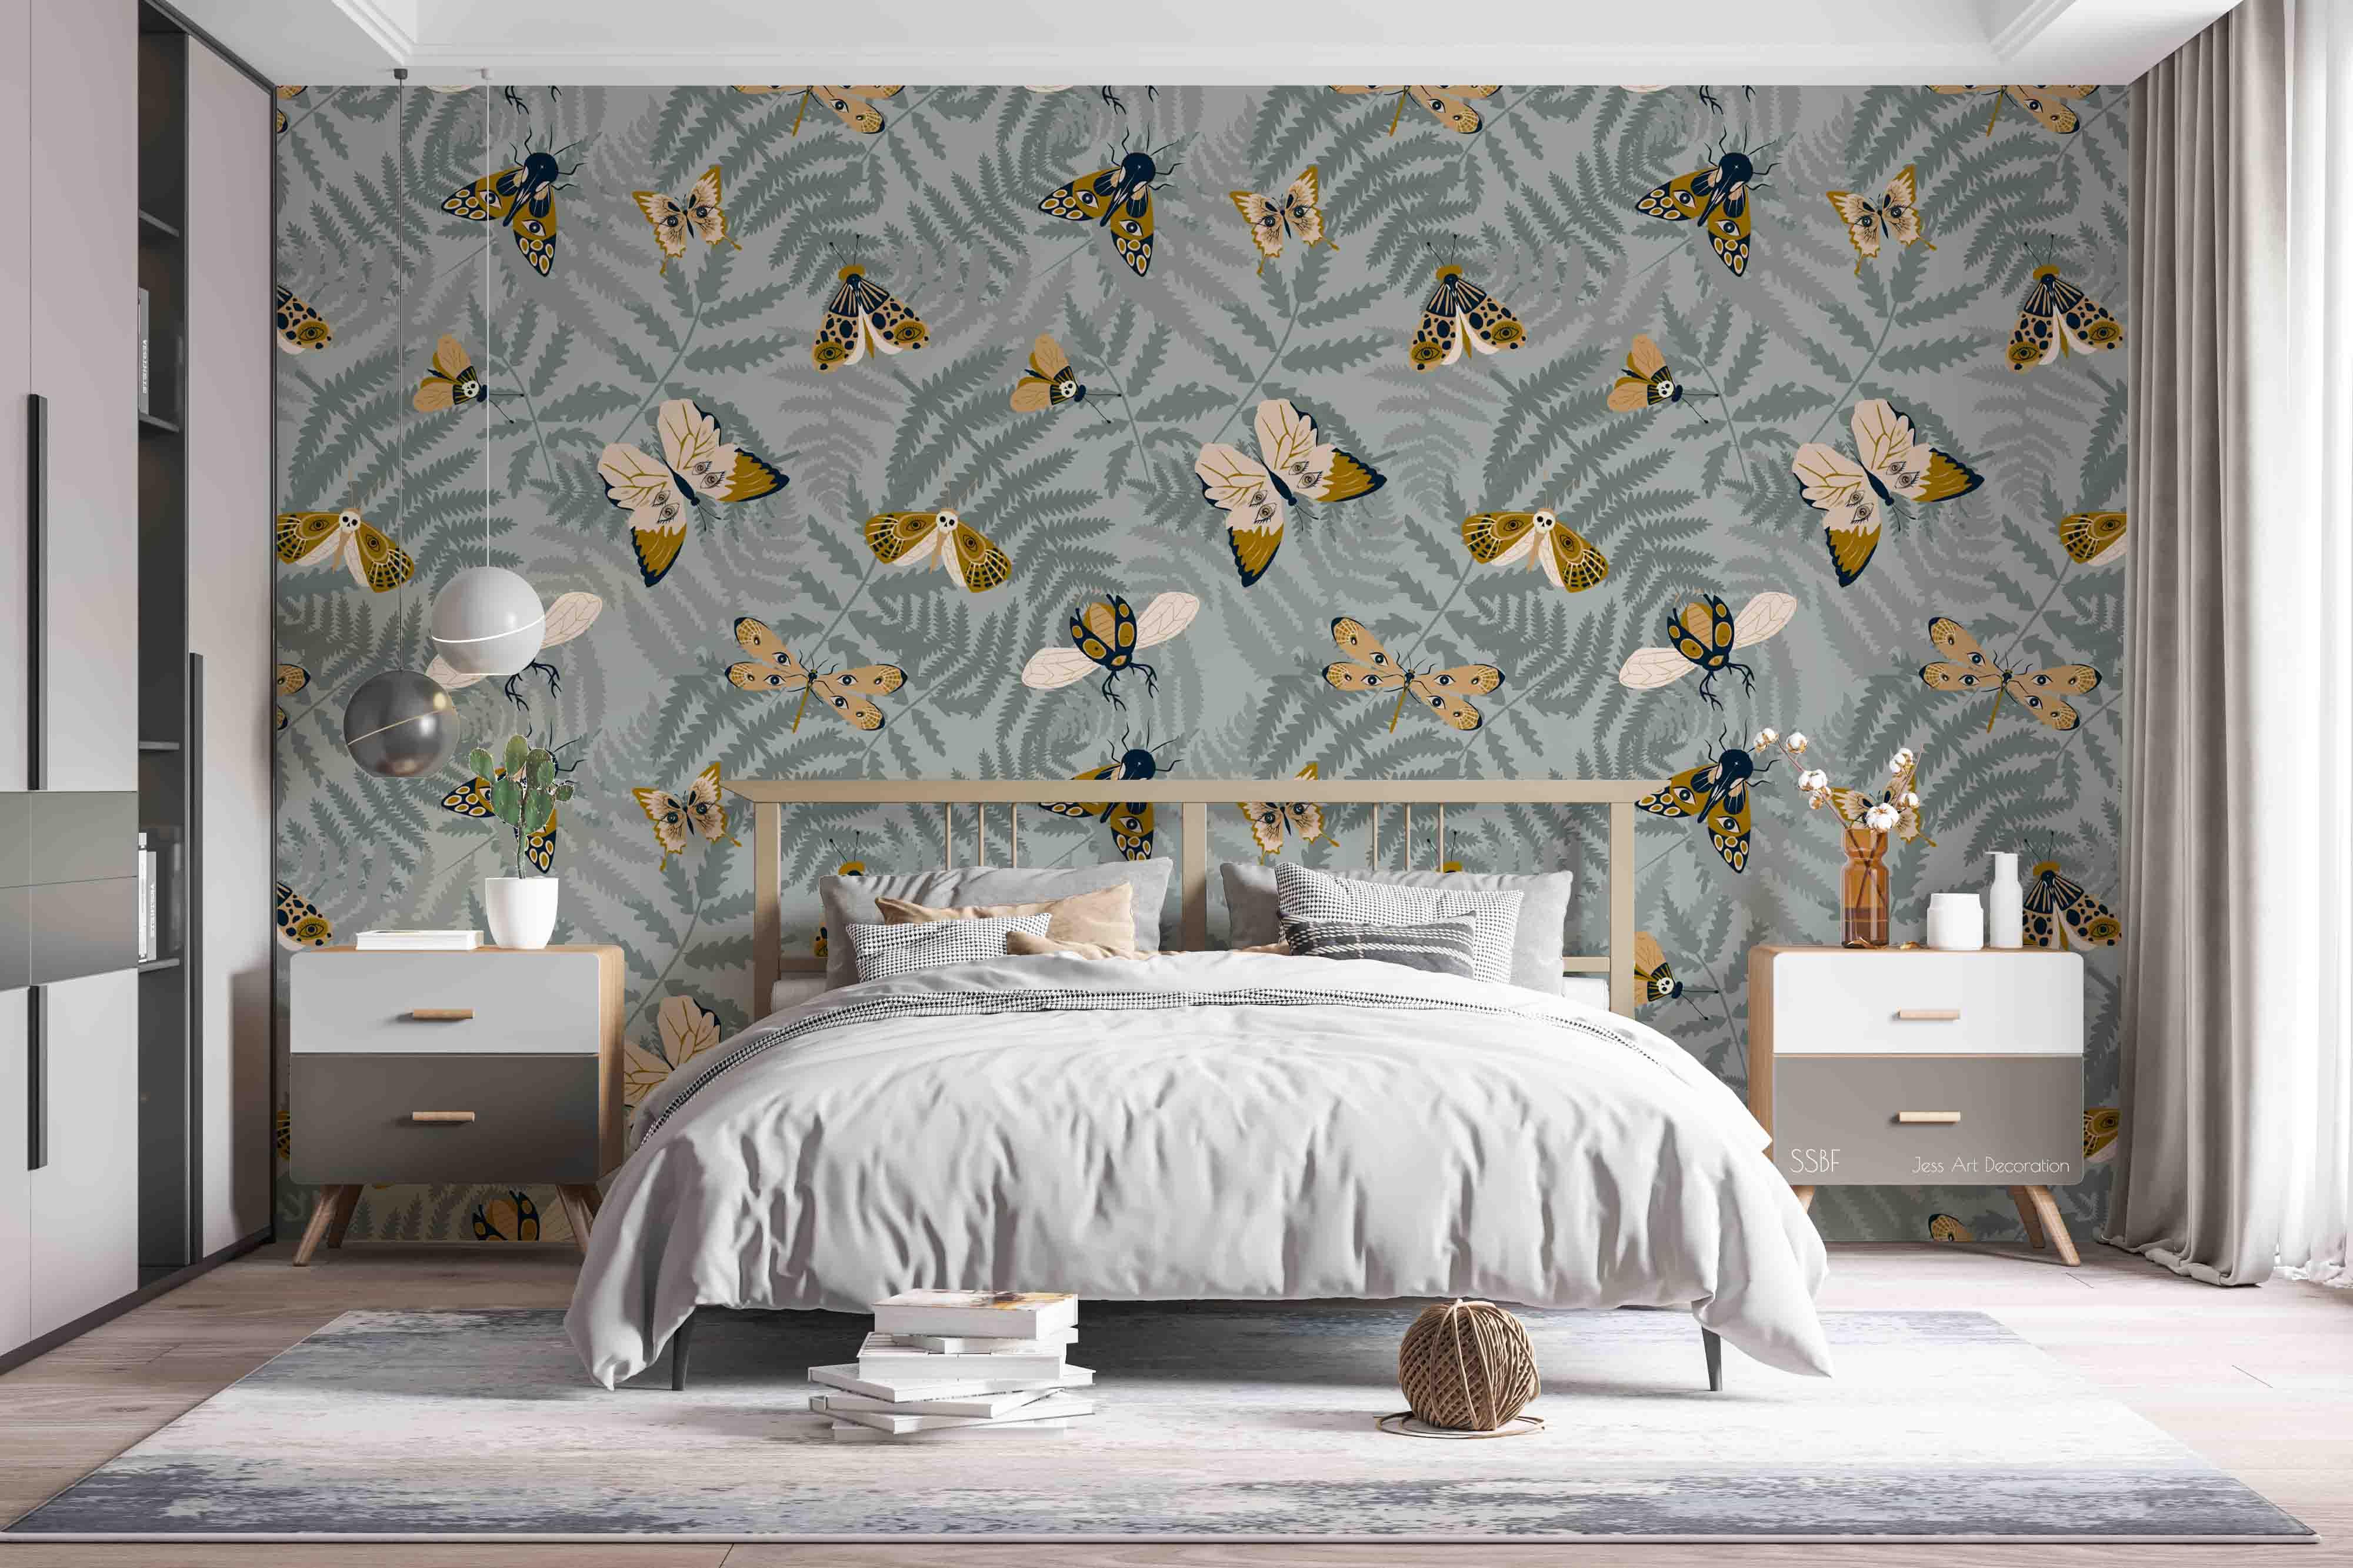 3D Vintage Butterfly Leaves Background Wall Mural Wallpaper GD 3505- Jess Art Decoration